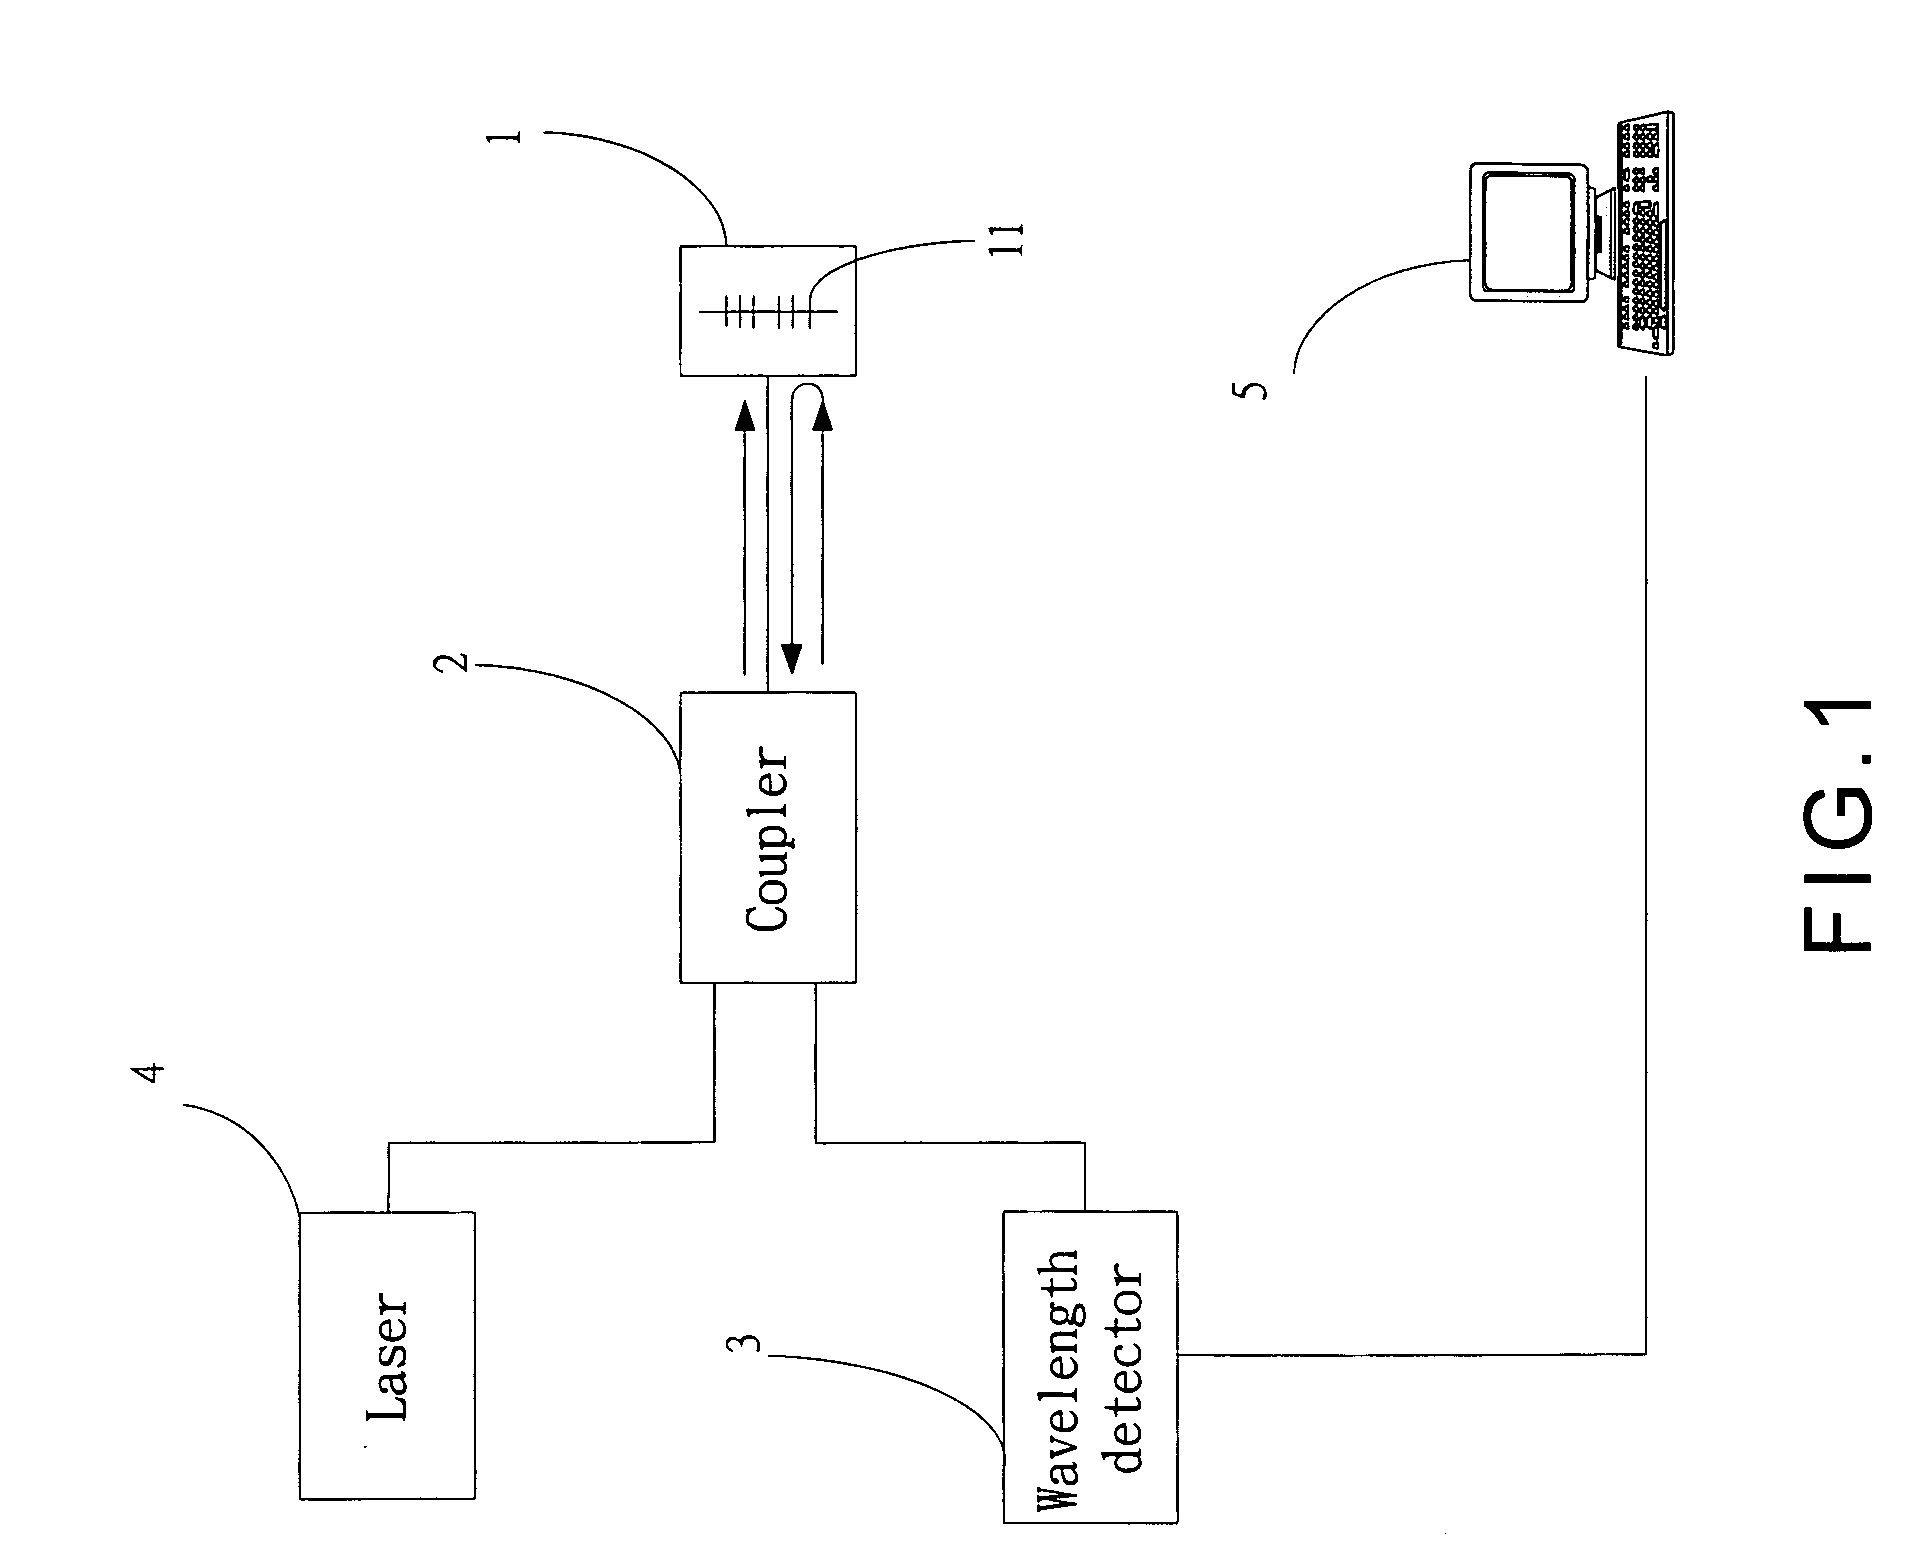 Method for examining corrosion of a steel reinforcement rod embedded in concrete